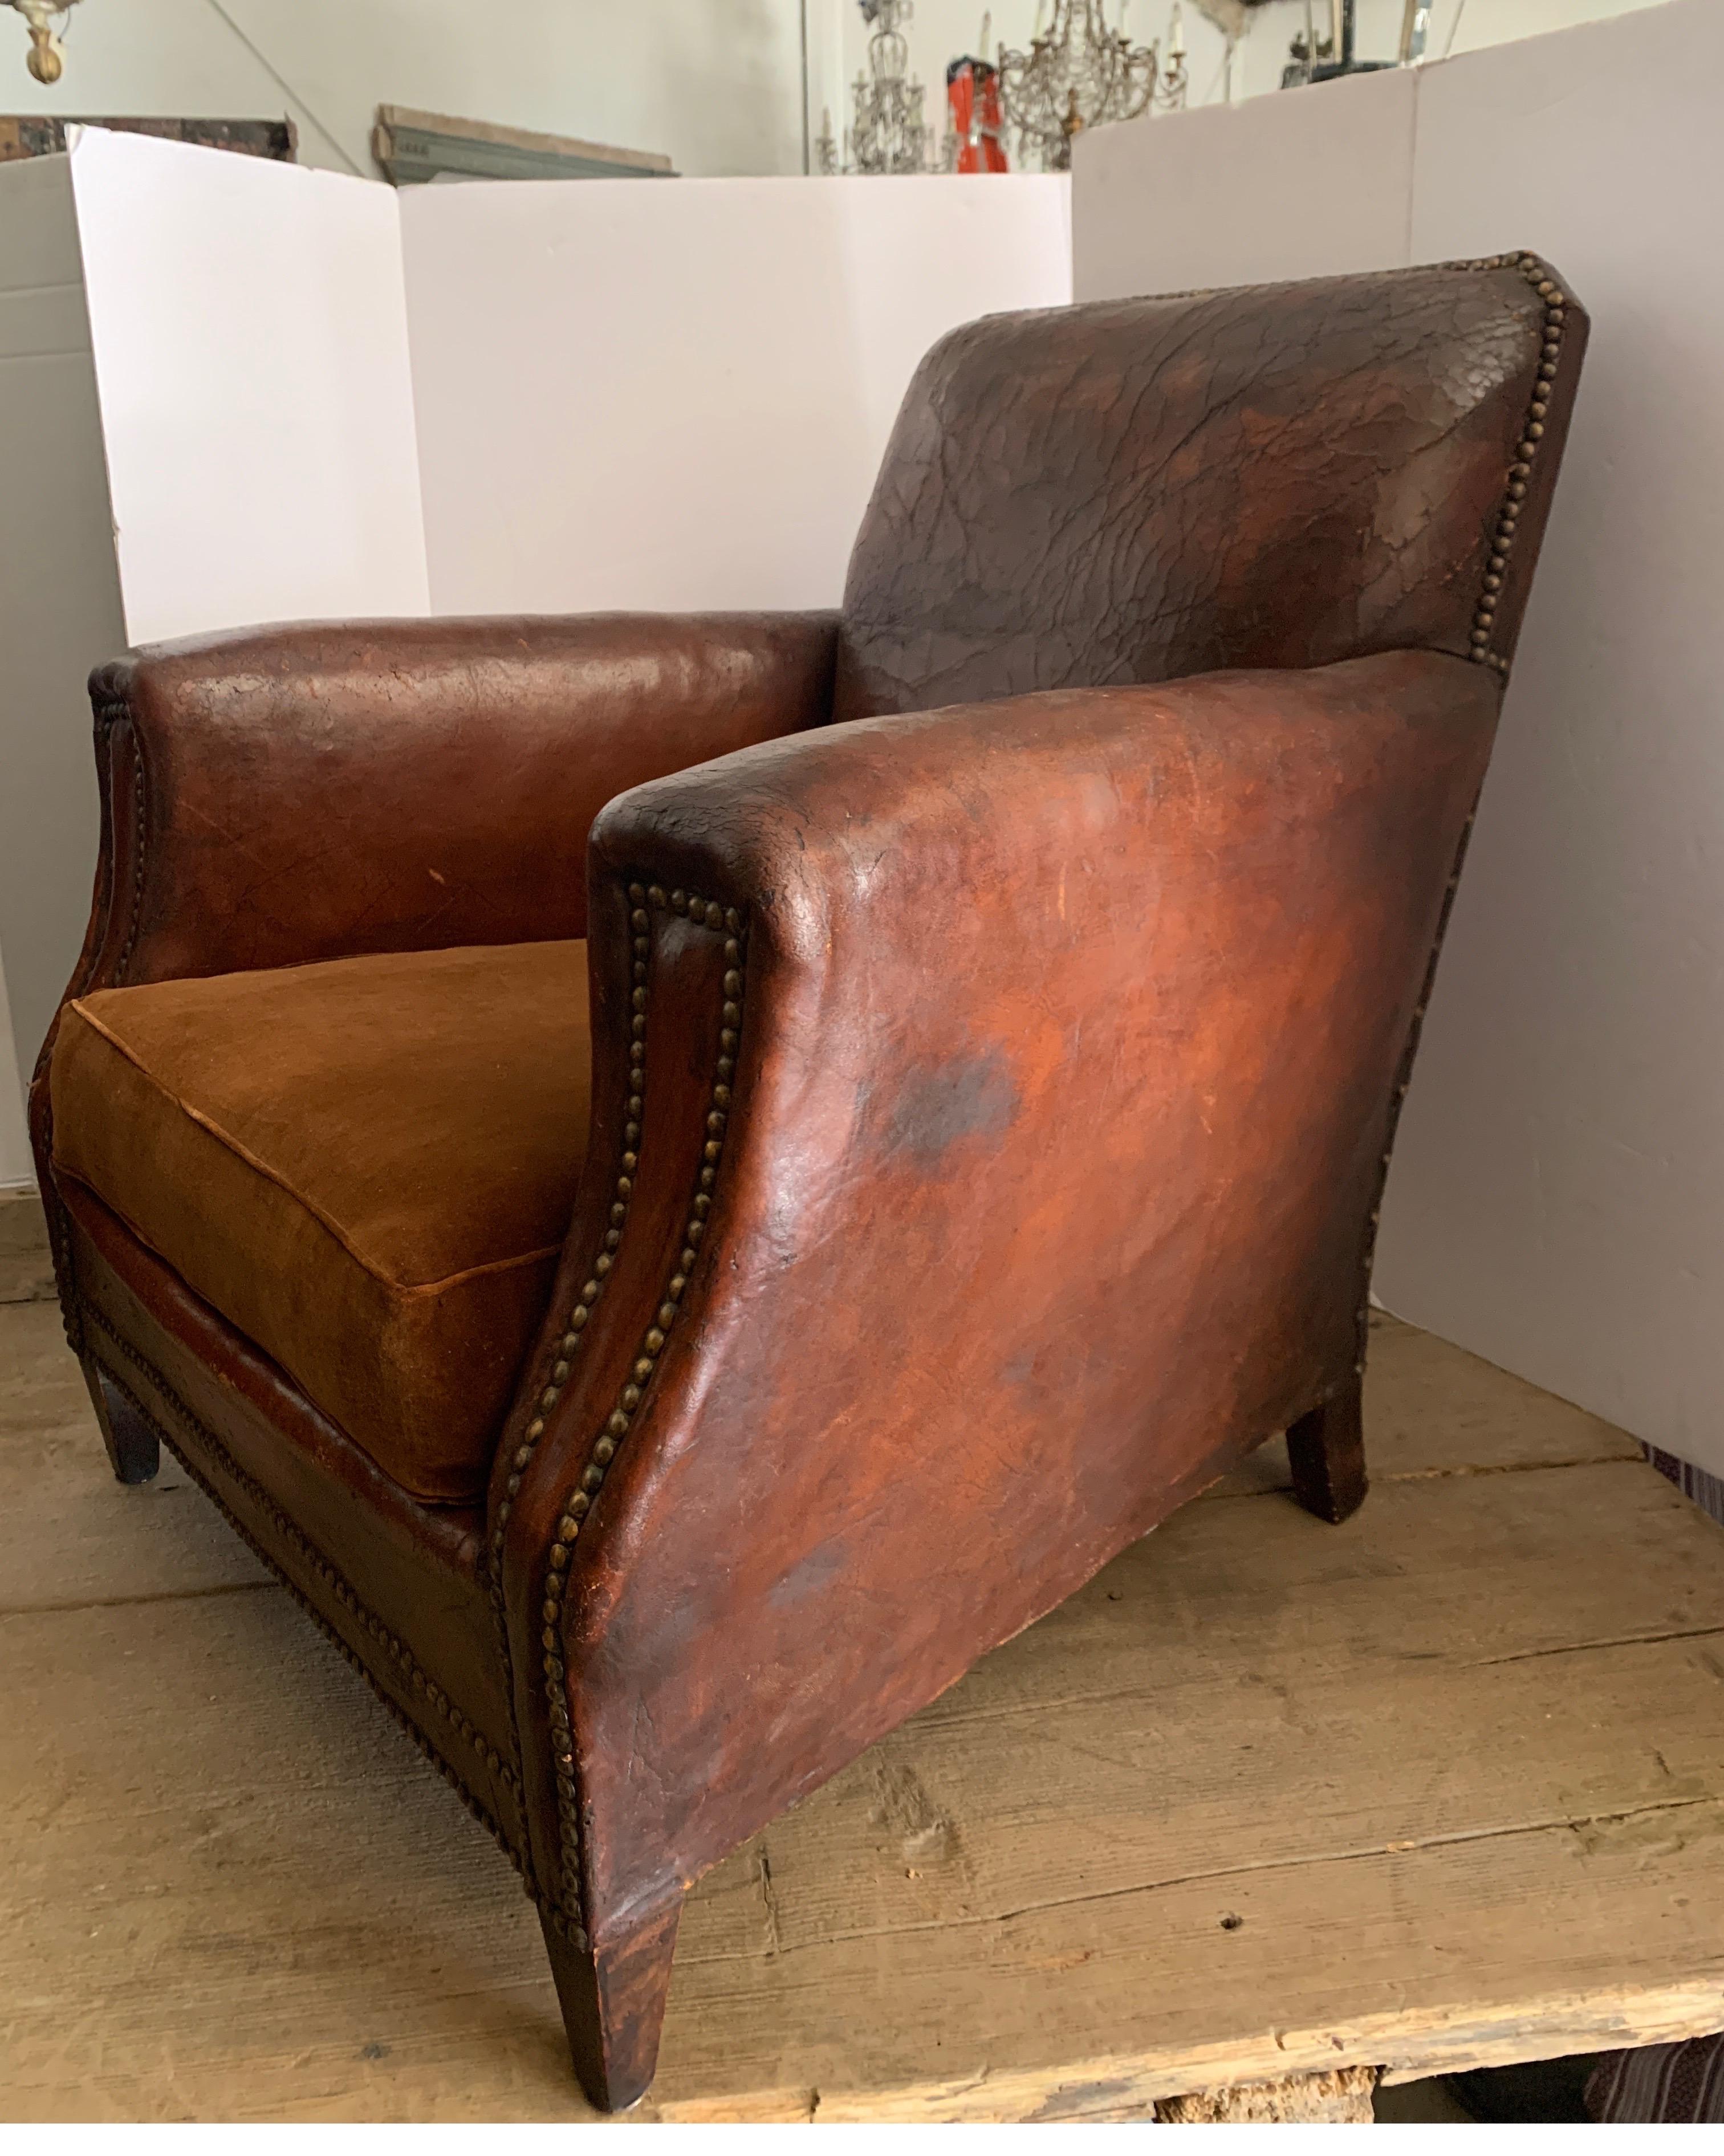 These are terrific leather chairs from France. They have amazing patina with that gorgeous color. There are a few places that have the leather separating and scratches that I have photographed. They are about 80 years old though.